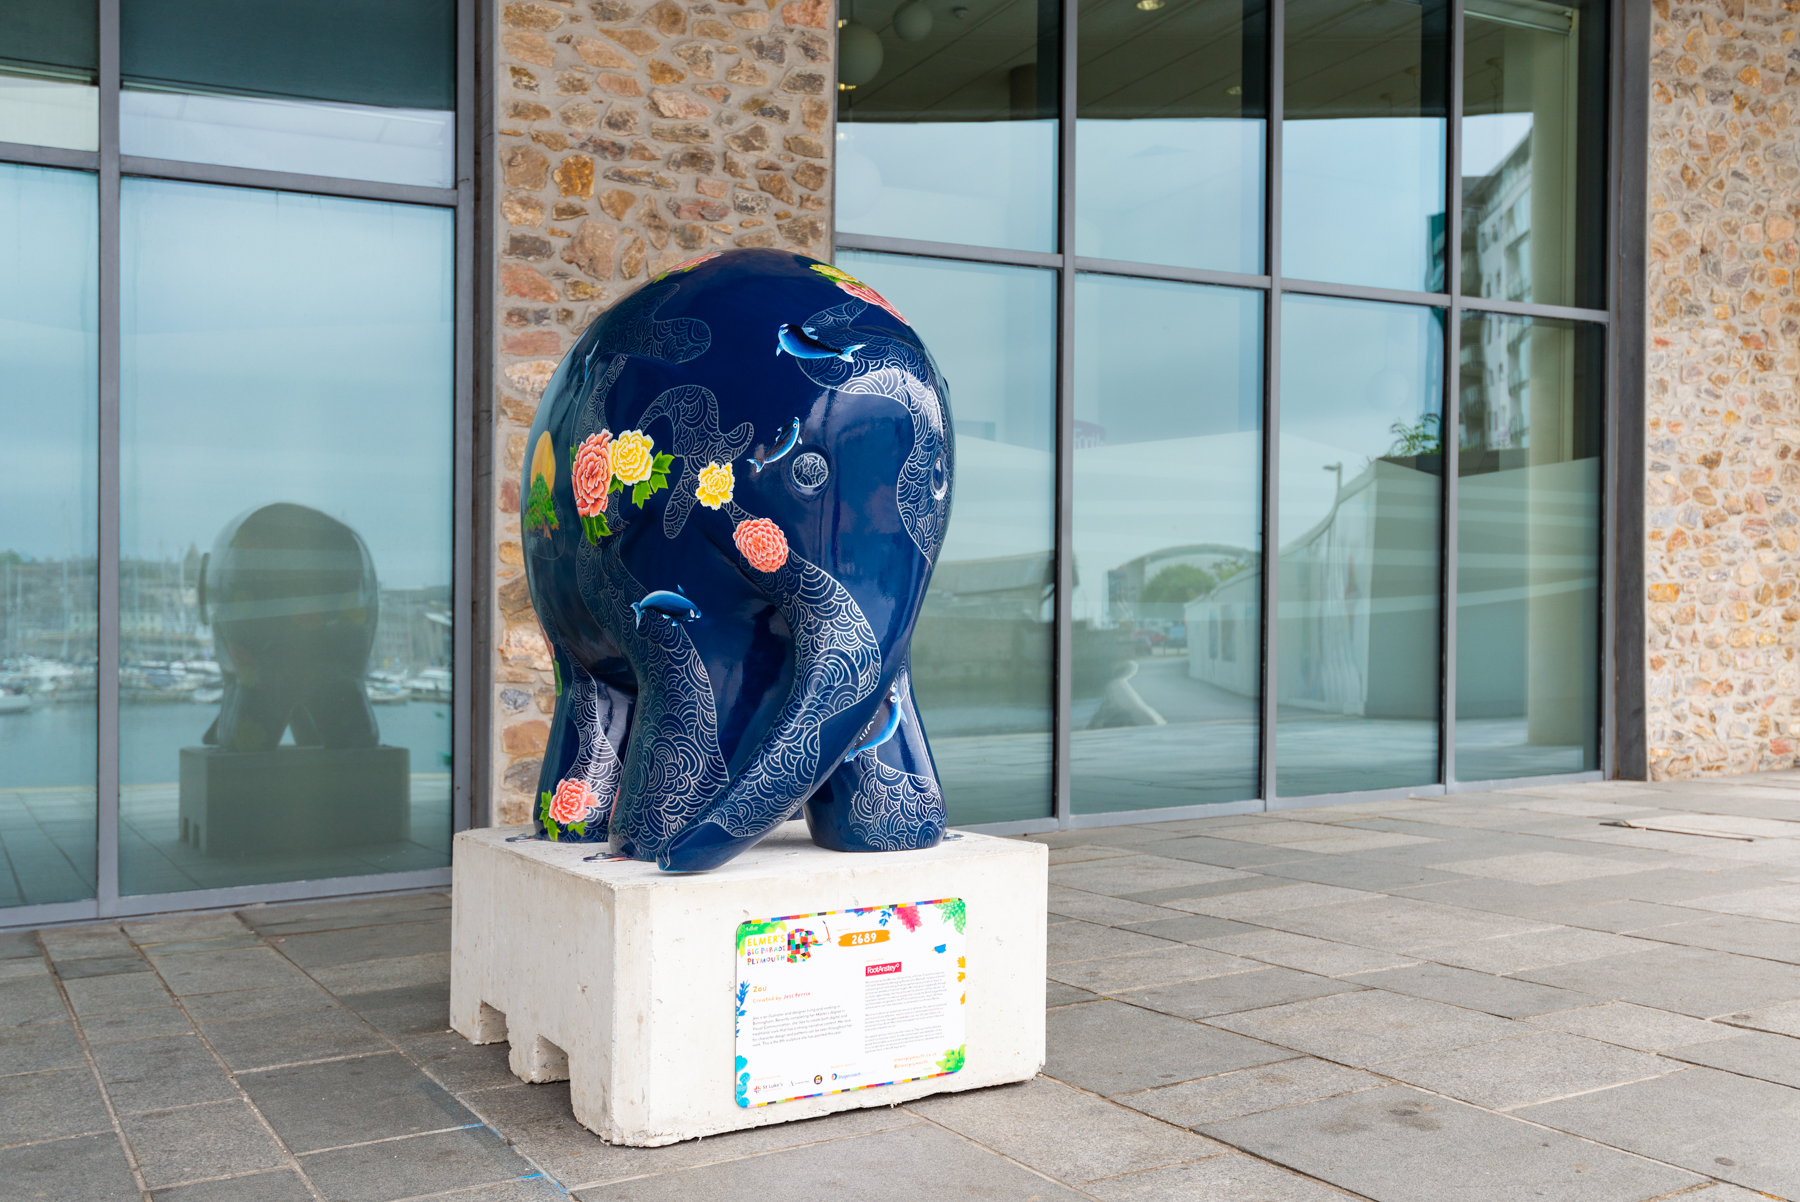 'Zou' by Jess Perrin. Sponsored by Foot Anstey - Image 14 of 16